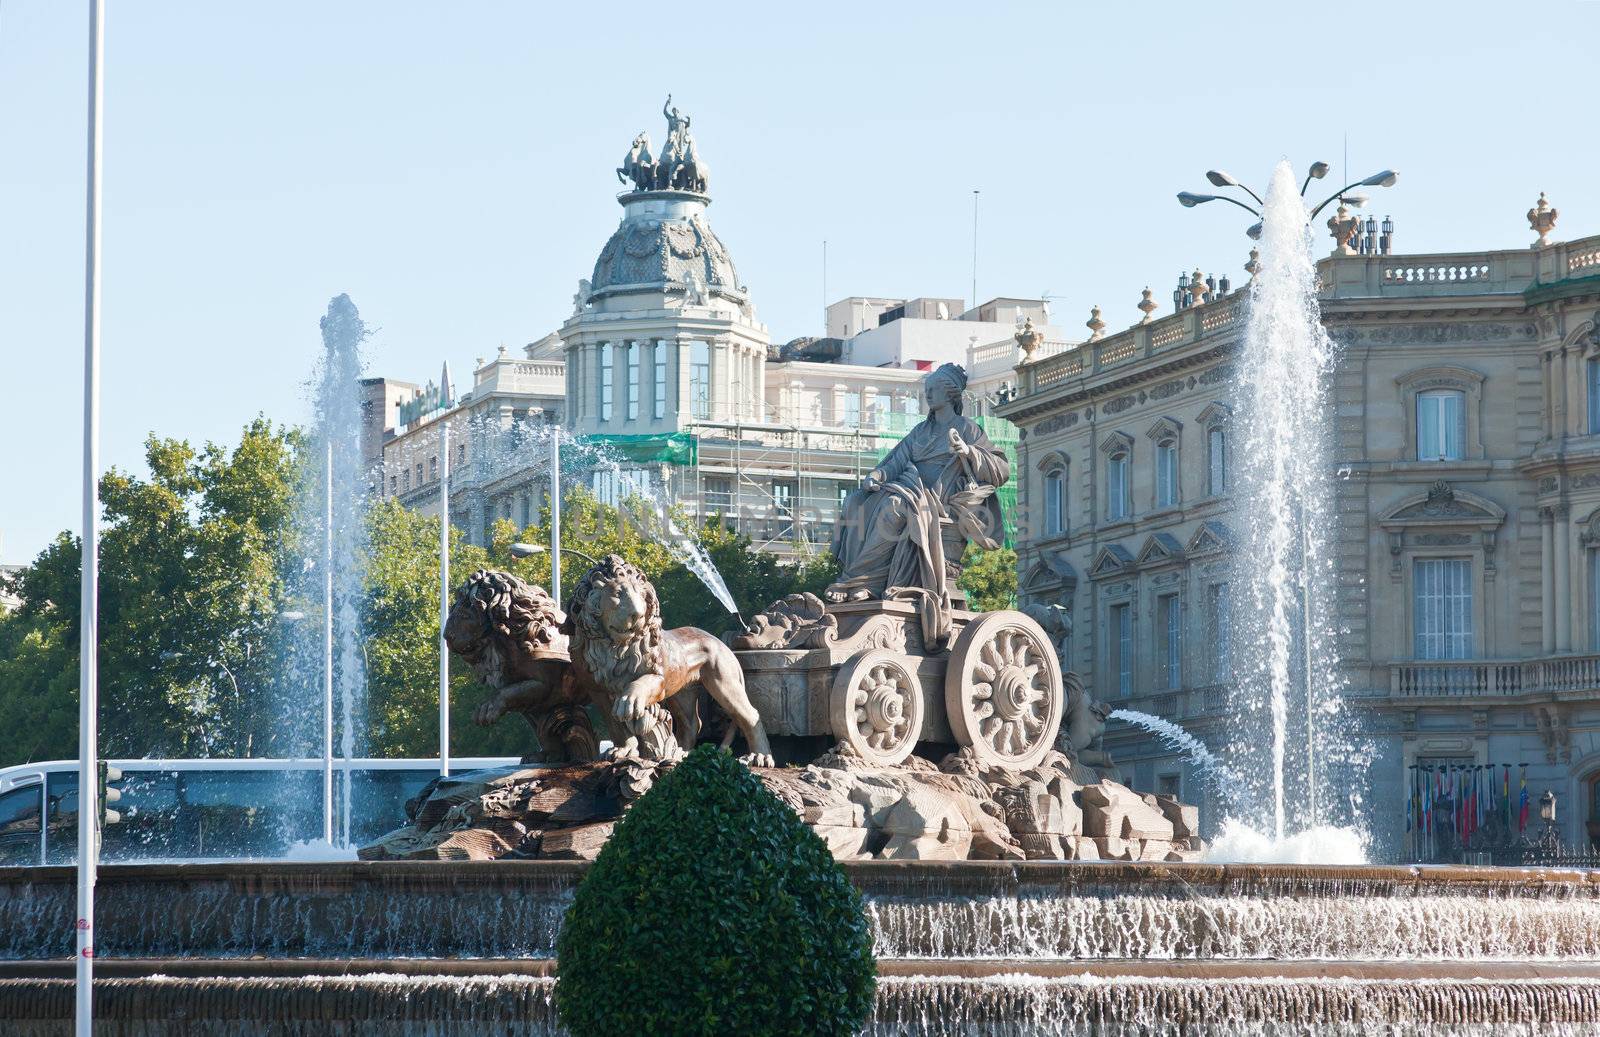 The famous Cibeles Fountain in Madrid, Spain 